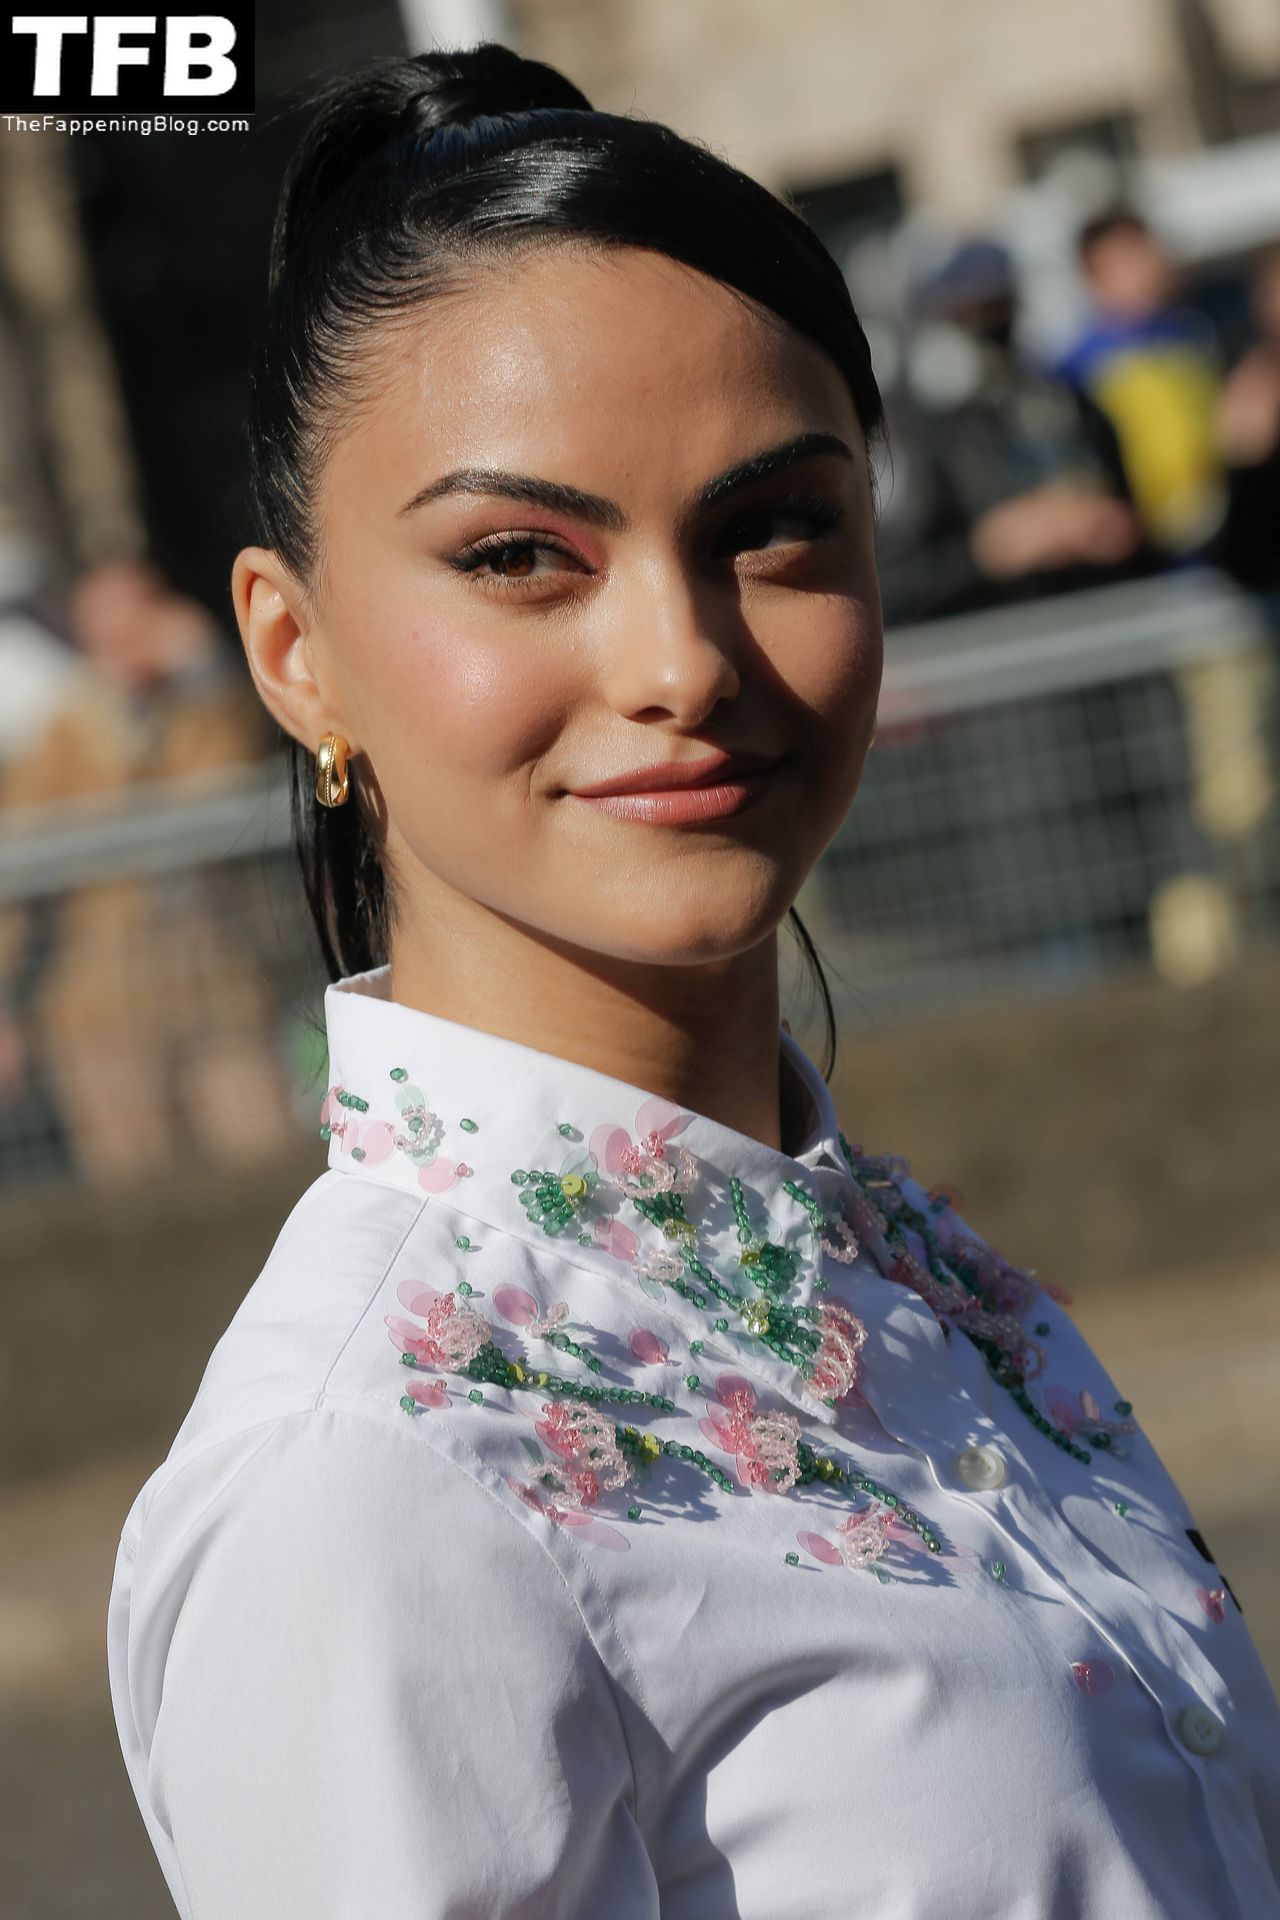 Camila-Mendes-Sexy-The-Fappening-Blog-20.jpg